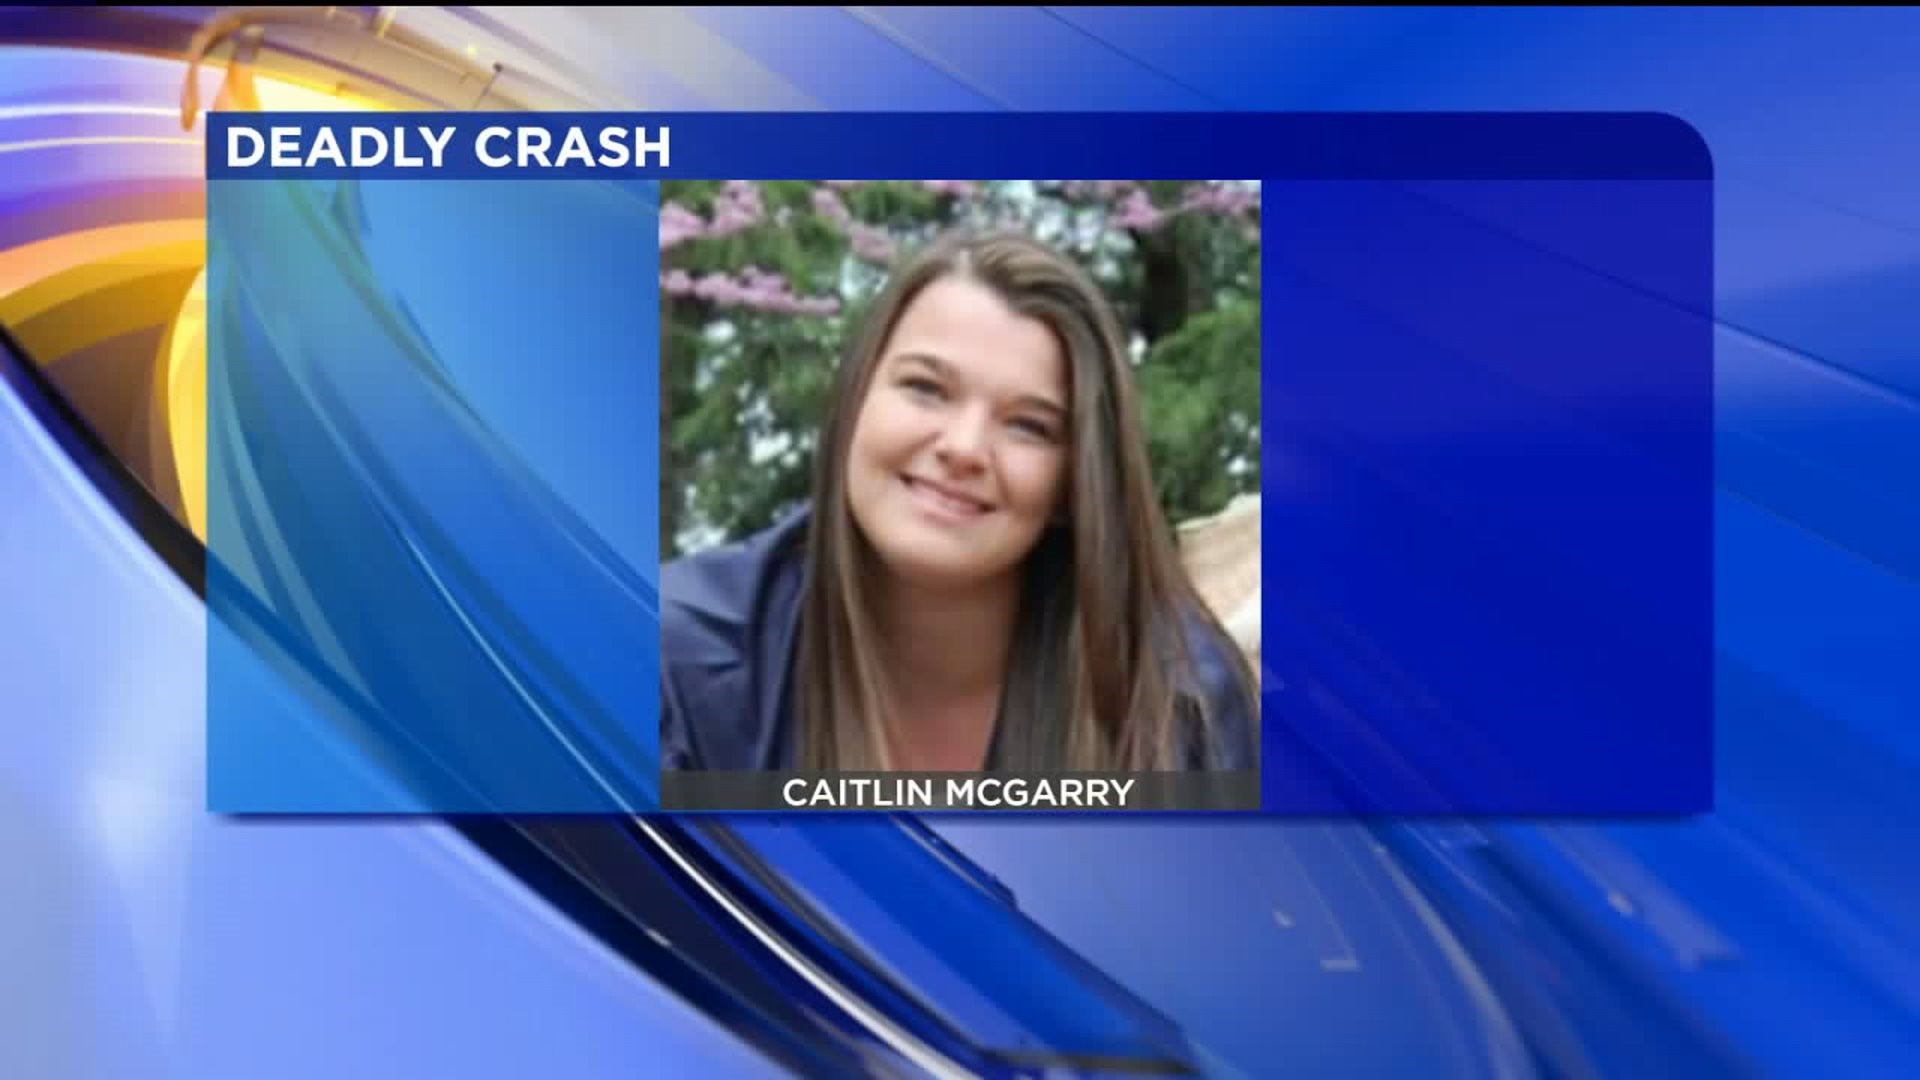 Woman Dies After Crash Left Her in Coma